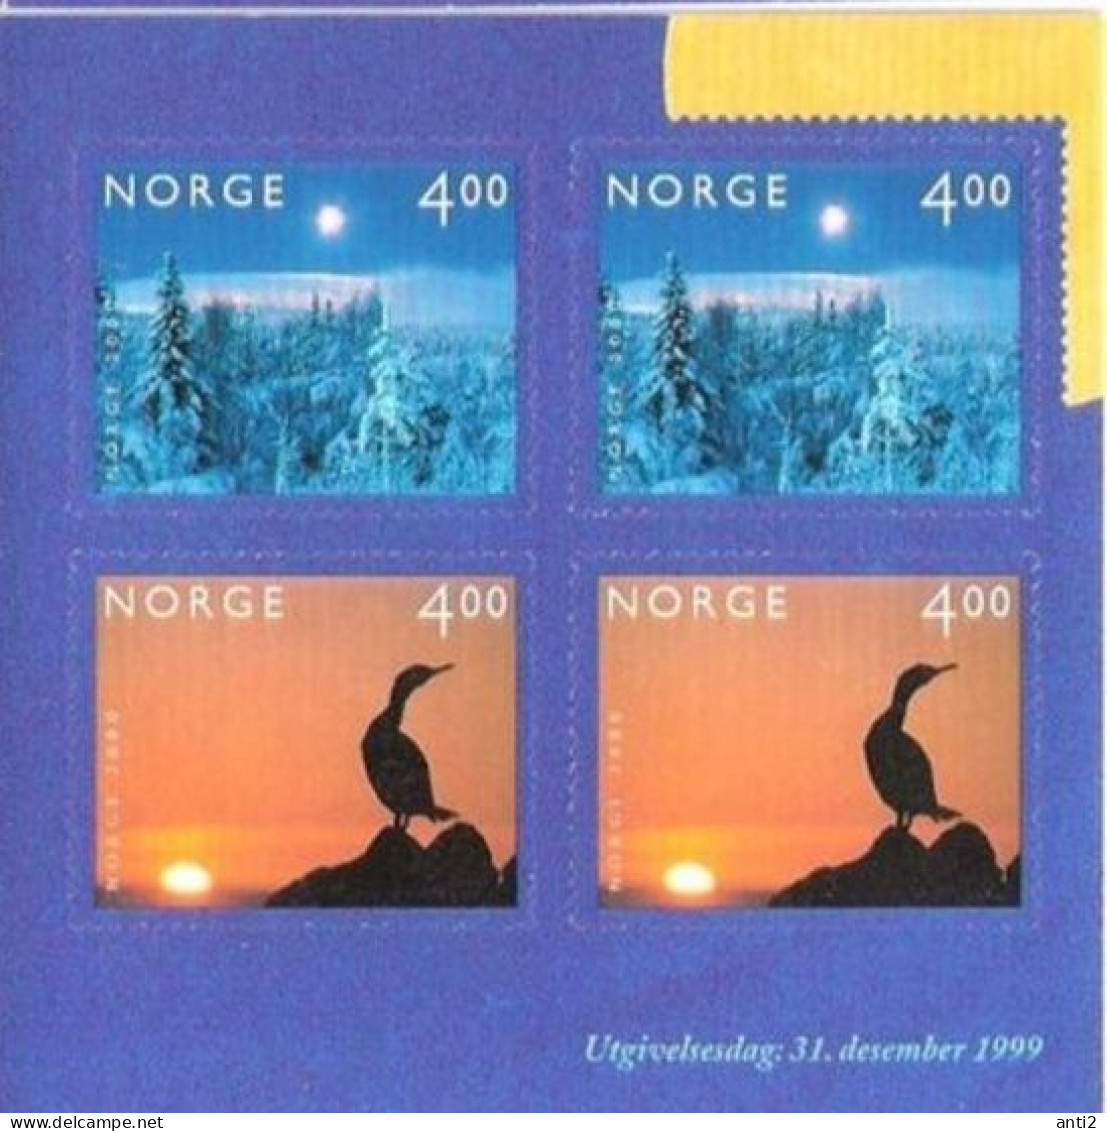 Norge Norway 1999 Millennium (III). Bird And Winter, Mi 1335-1336 From Booklet,  MNH(**) - Neufs